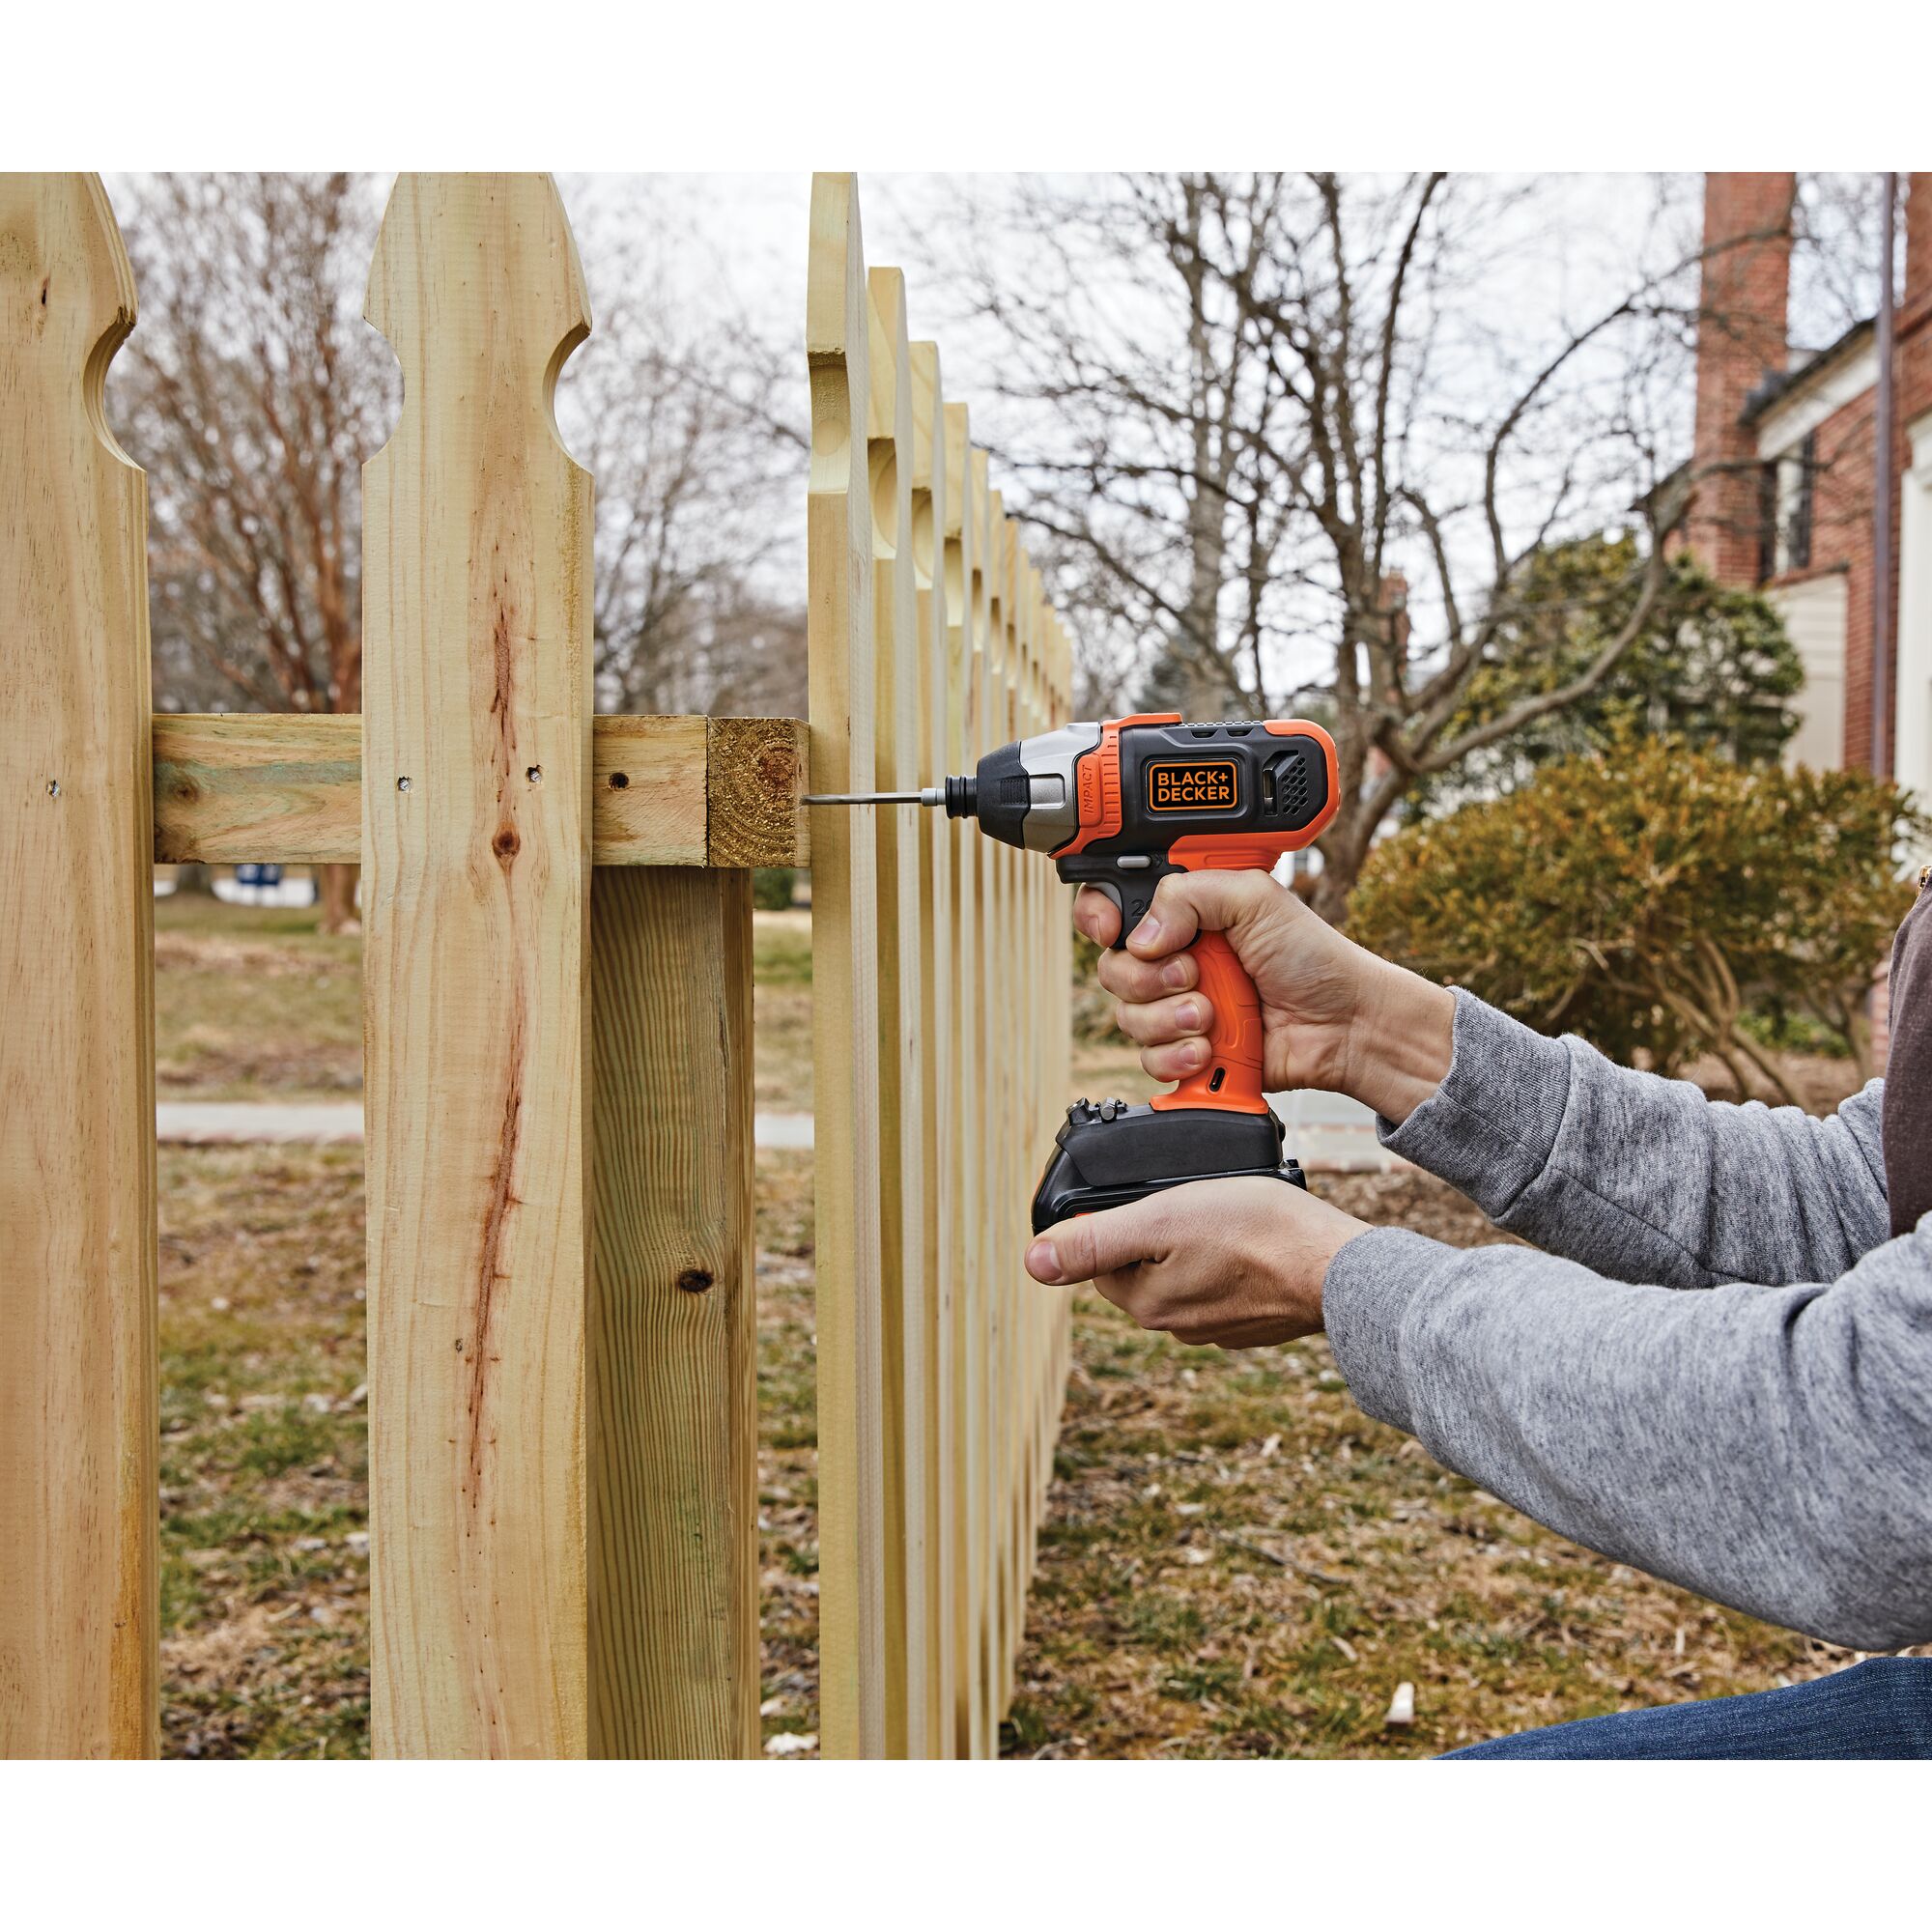 Cordless Impact Driver being used for fixing wooden fence.